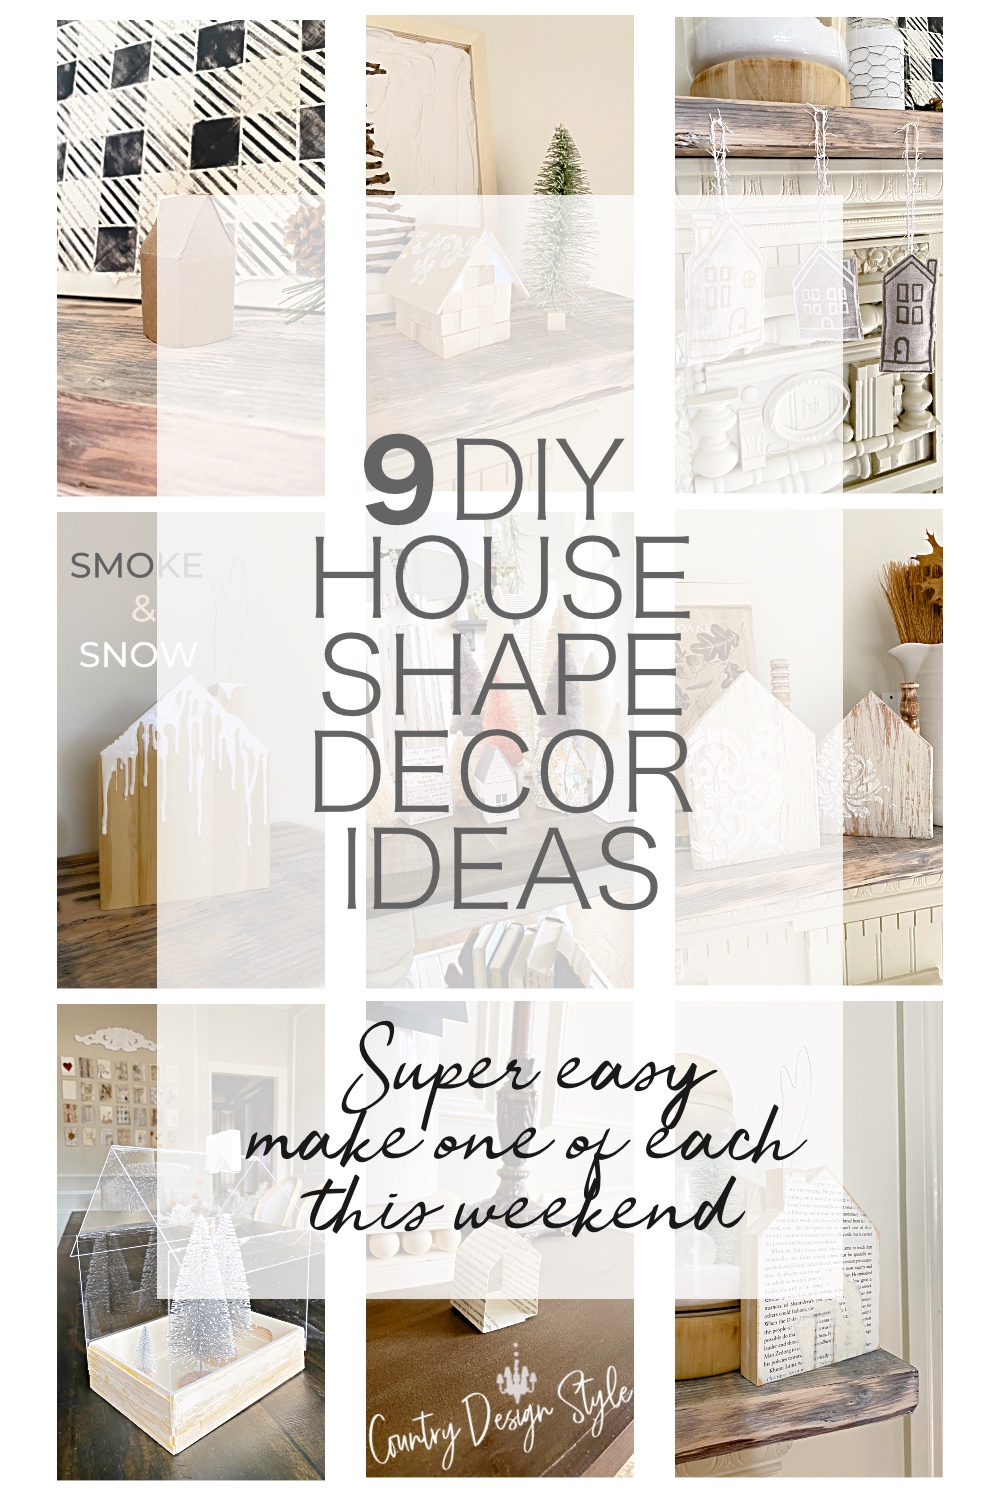 9 exciting DIY house shape decor to create this weekend